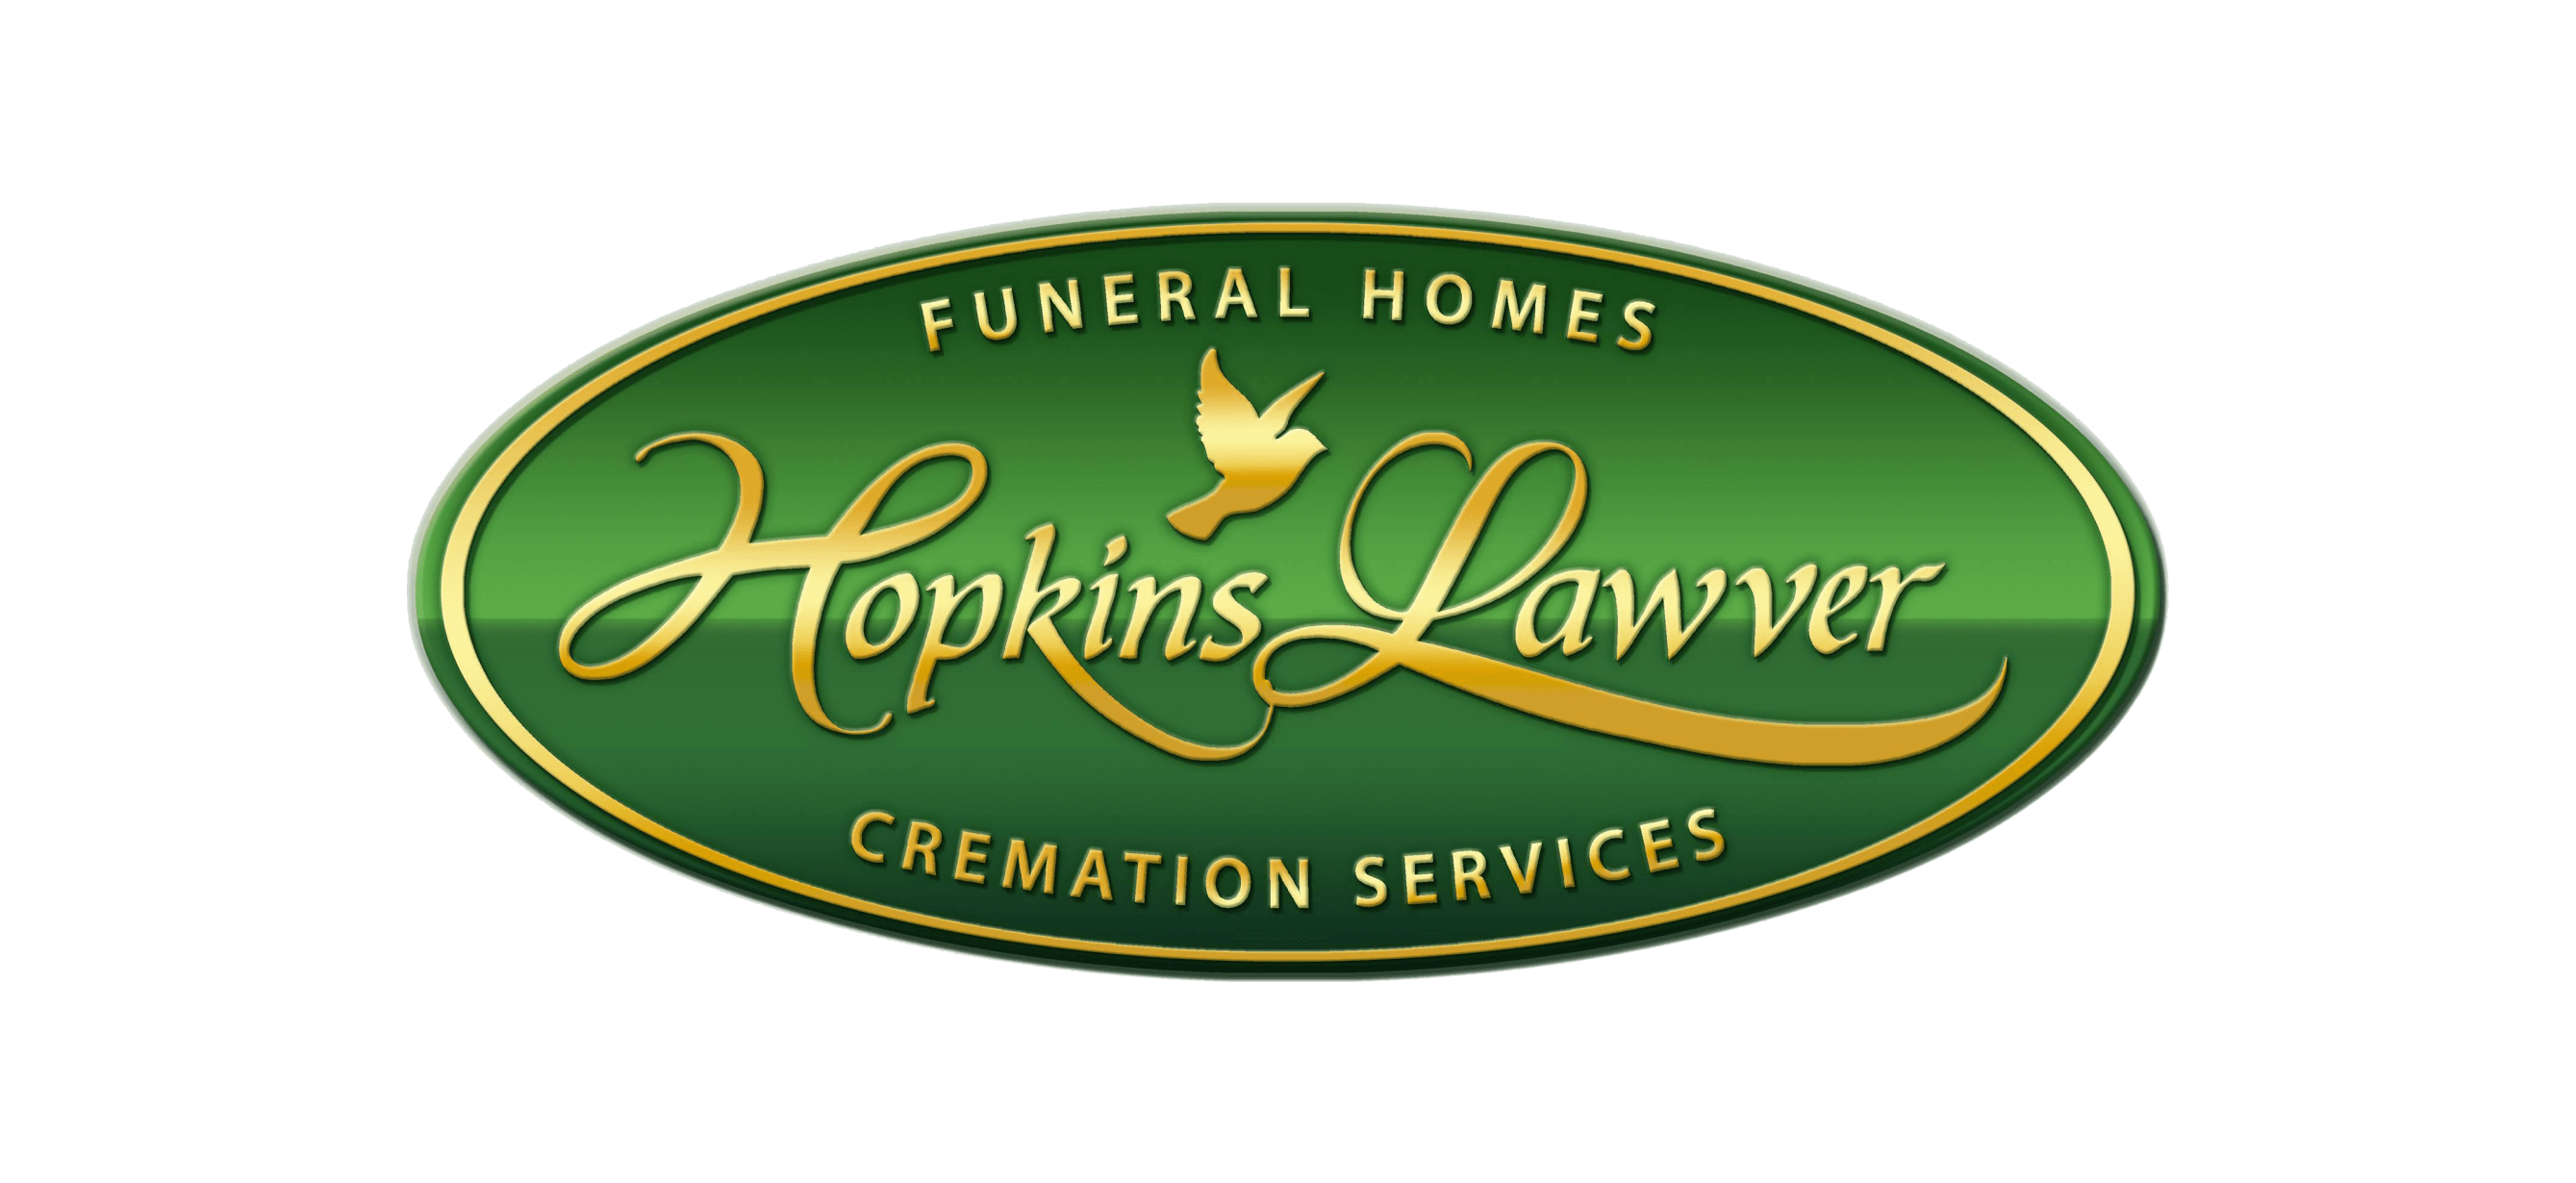 Hopkins Lawver Funeral Homes and Cremation Services Logo